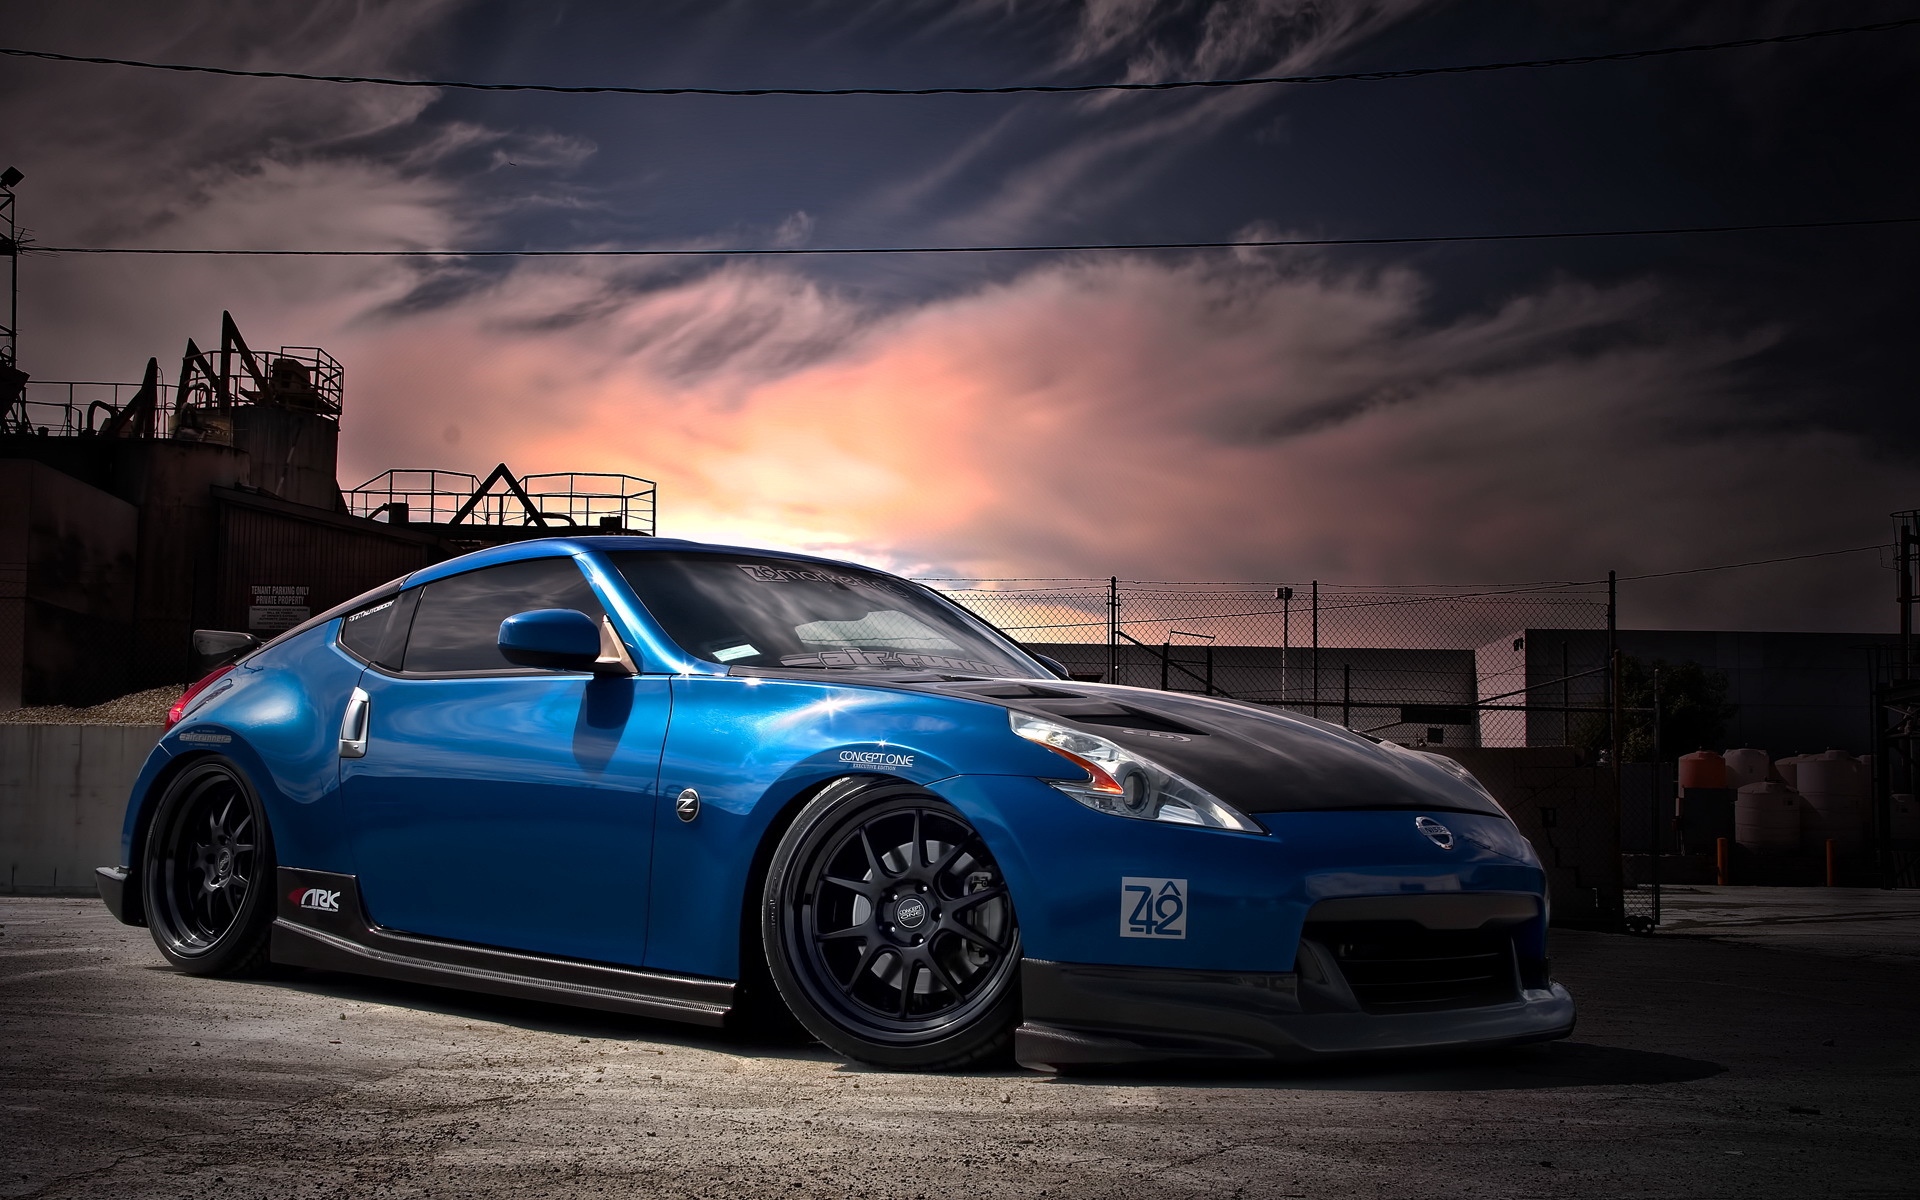 Nissan Car Tuning Front Angle View Nissan Fairlady Z Nissan 370Z 1920x1200